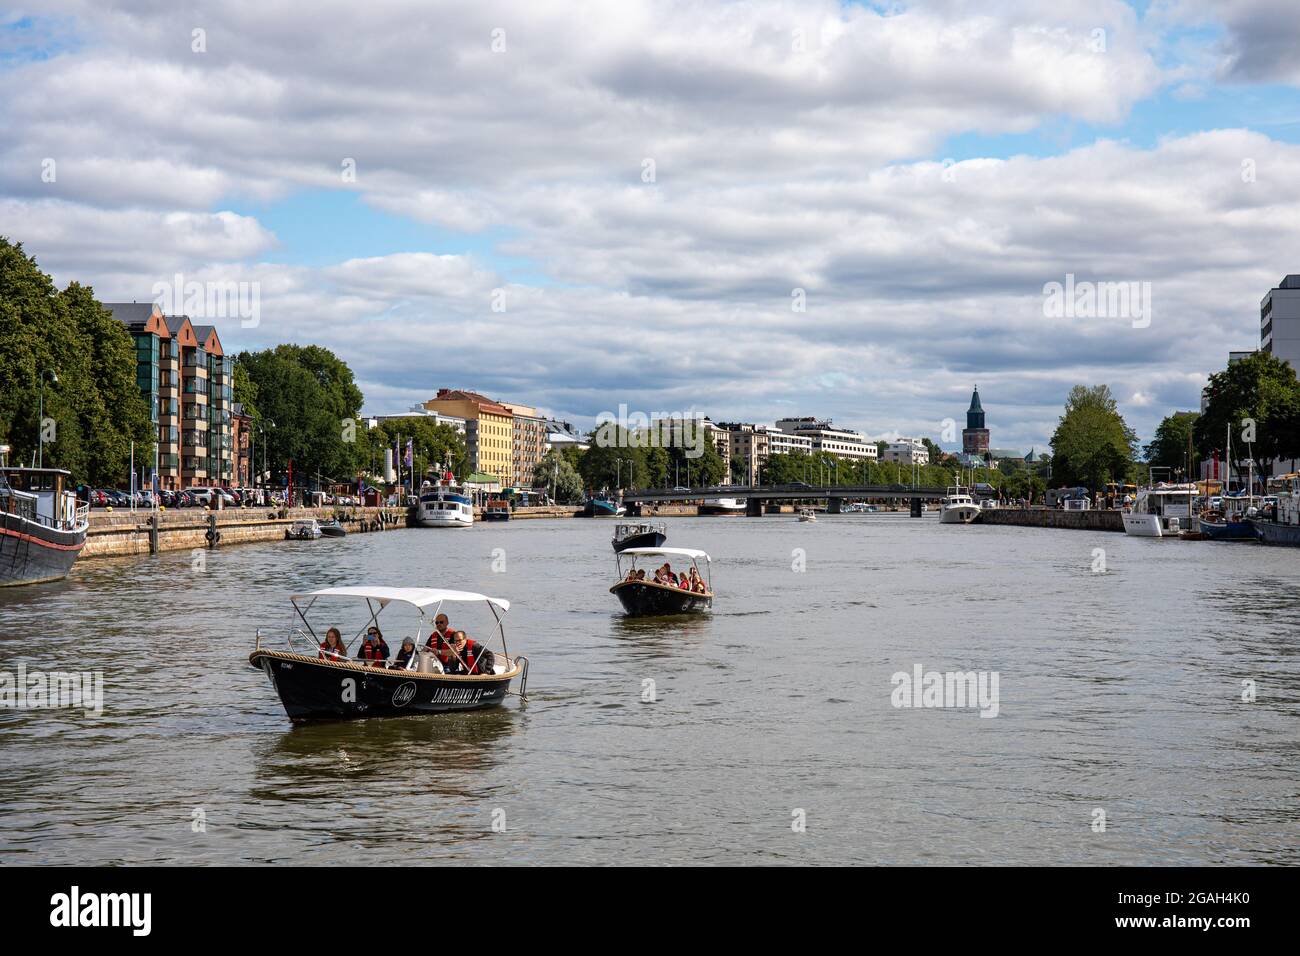 Rental electric boats on River Aura in Turku, Finland Stock Photo